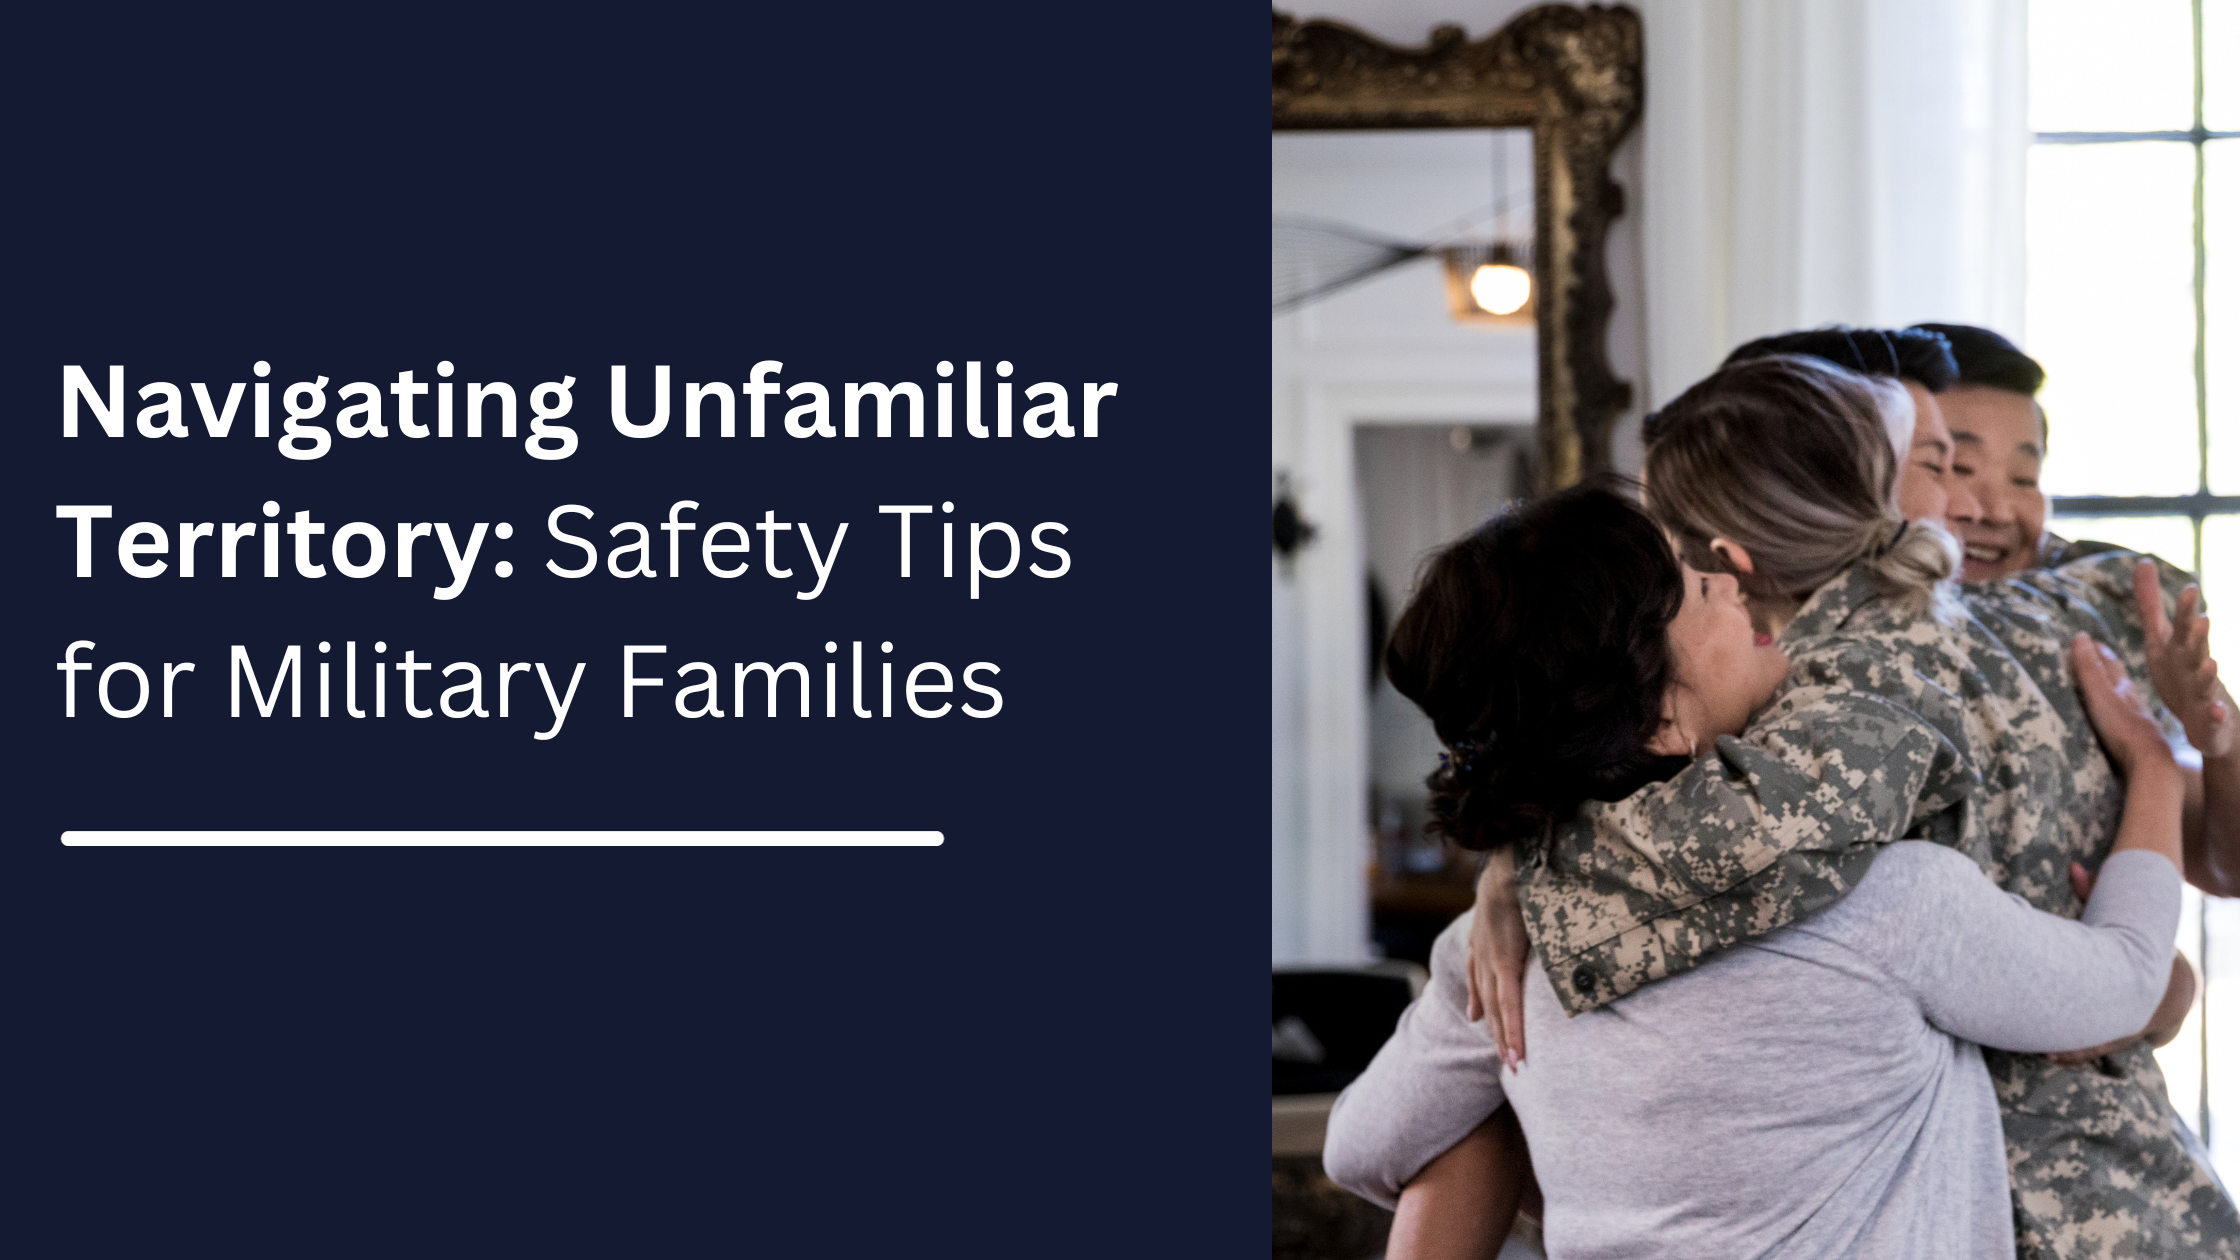 Safety Tips for Military Families